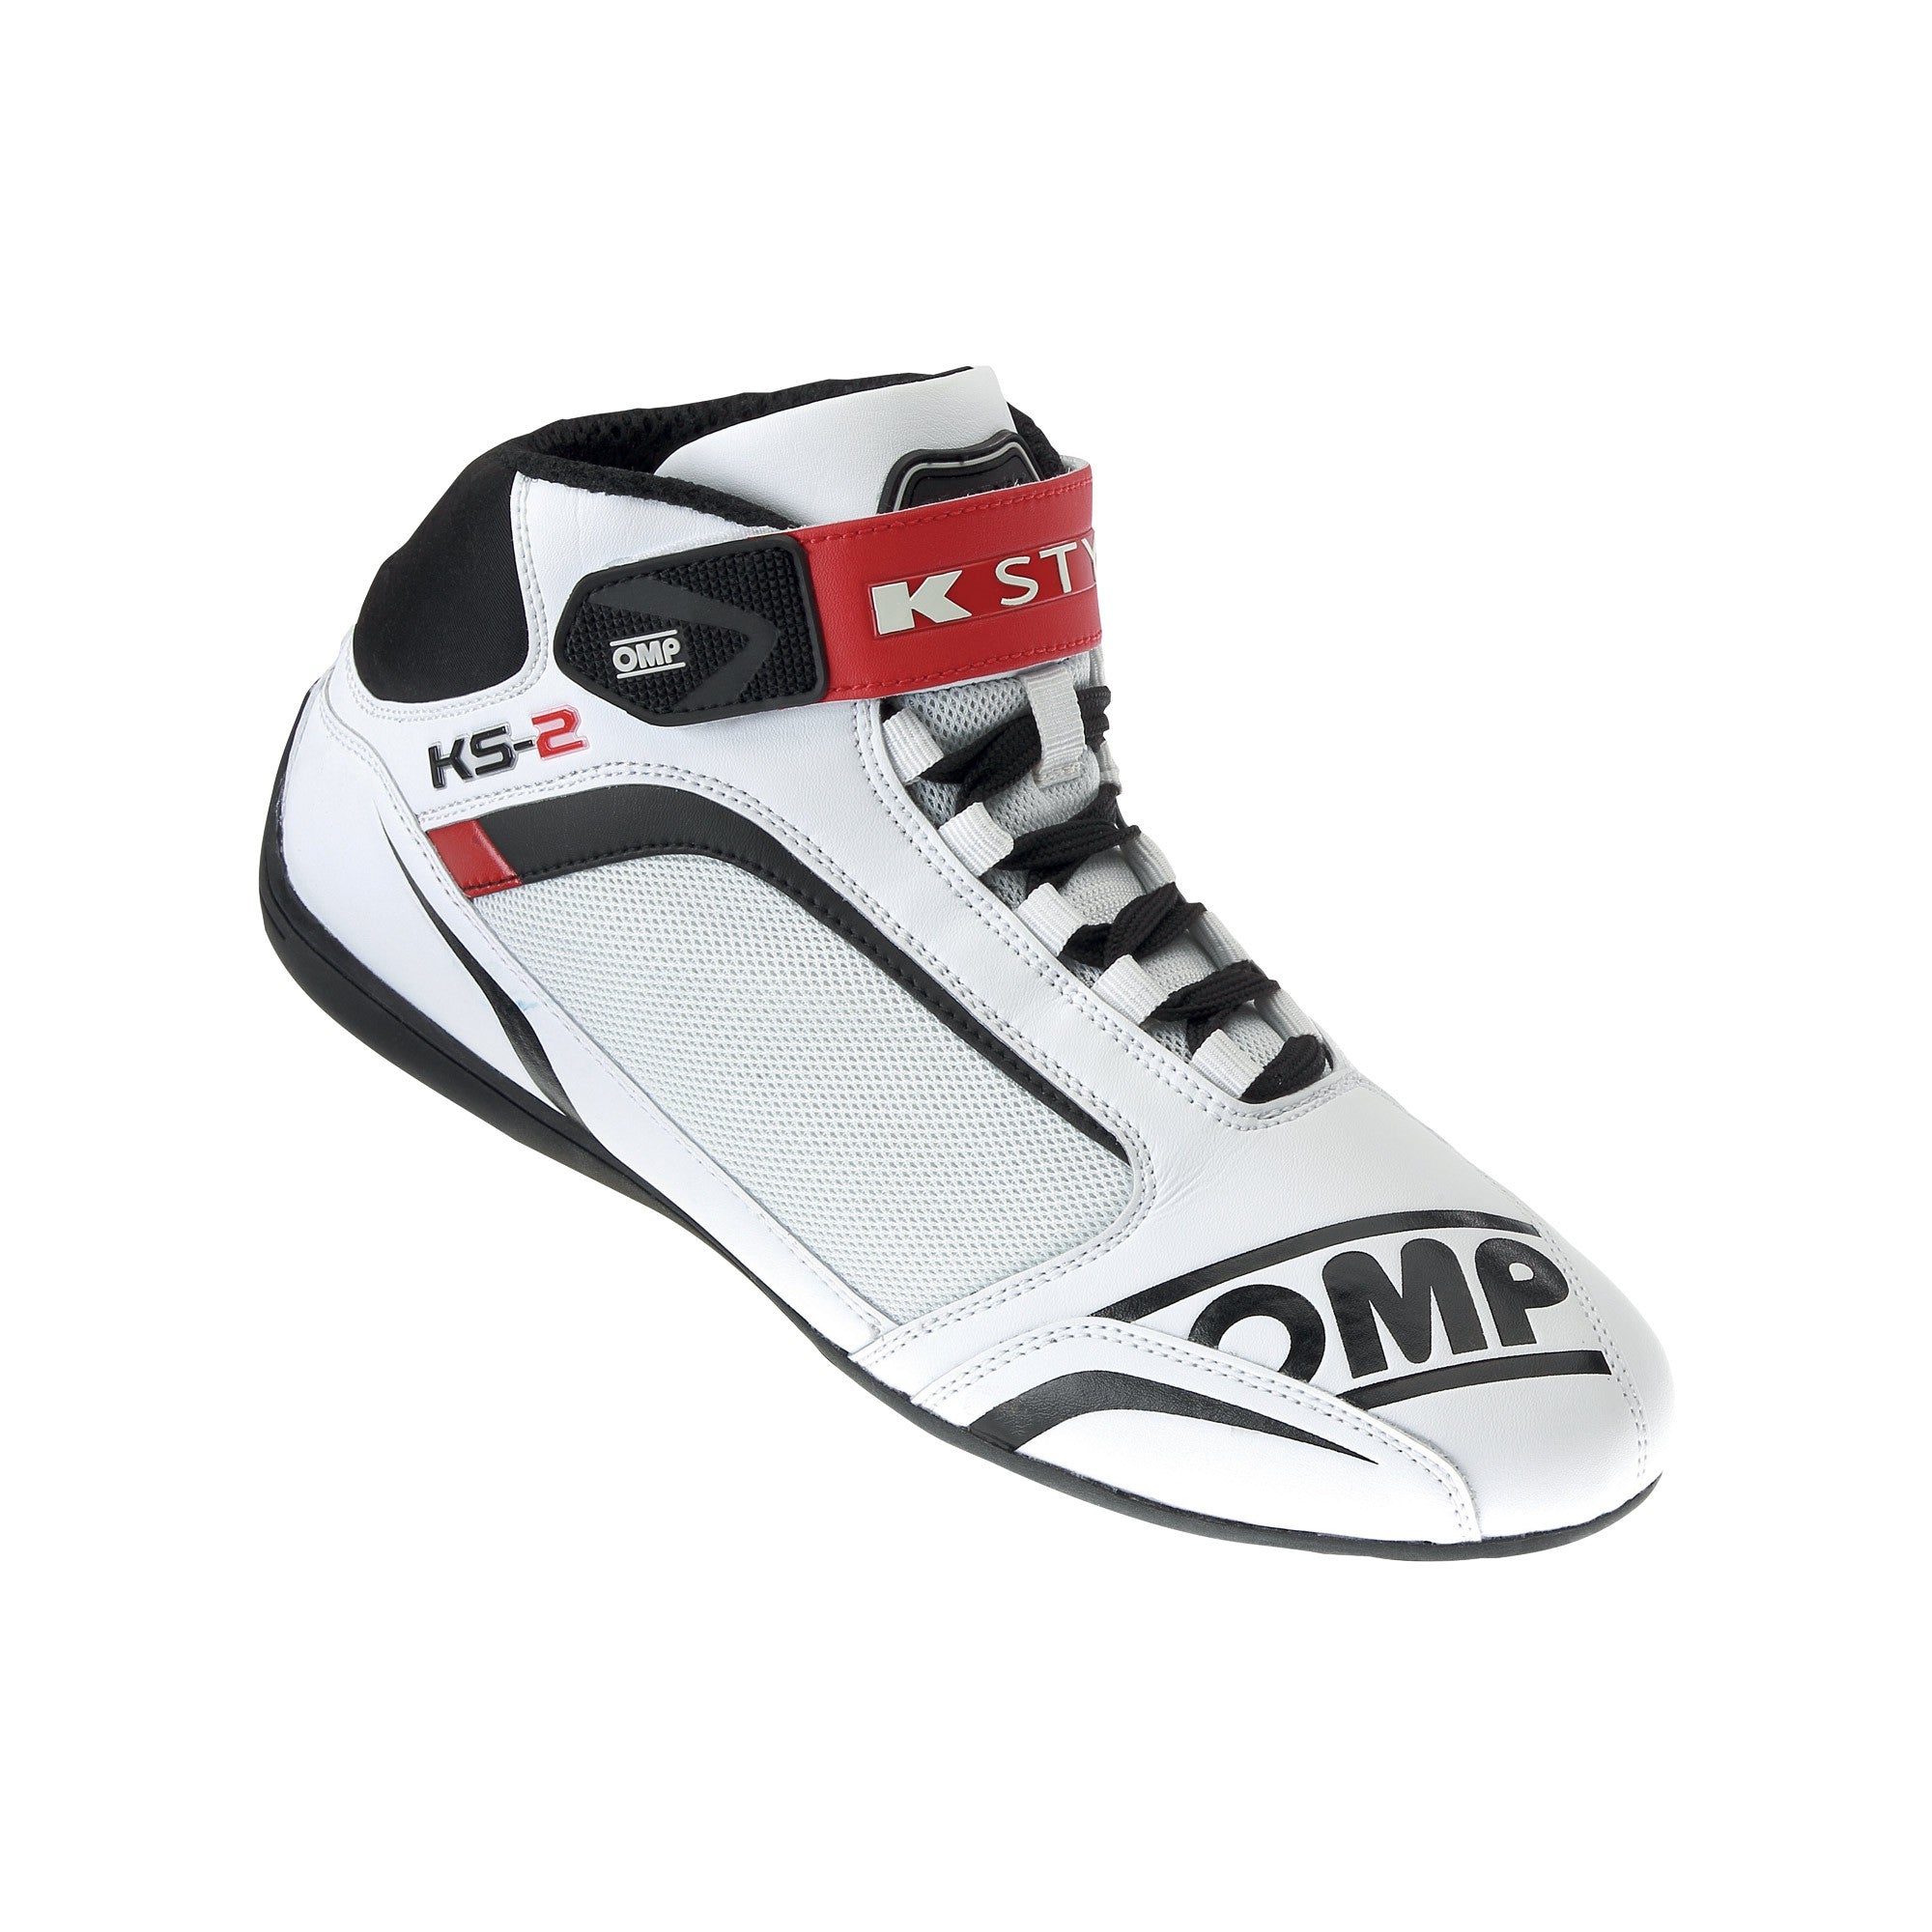 OMP KARTING SHOE KS-2 - Professional Racing Shoes & Safety Equipment at Paragon Competition in Toronto